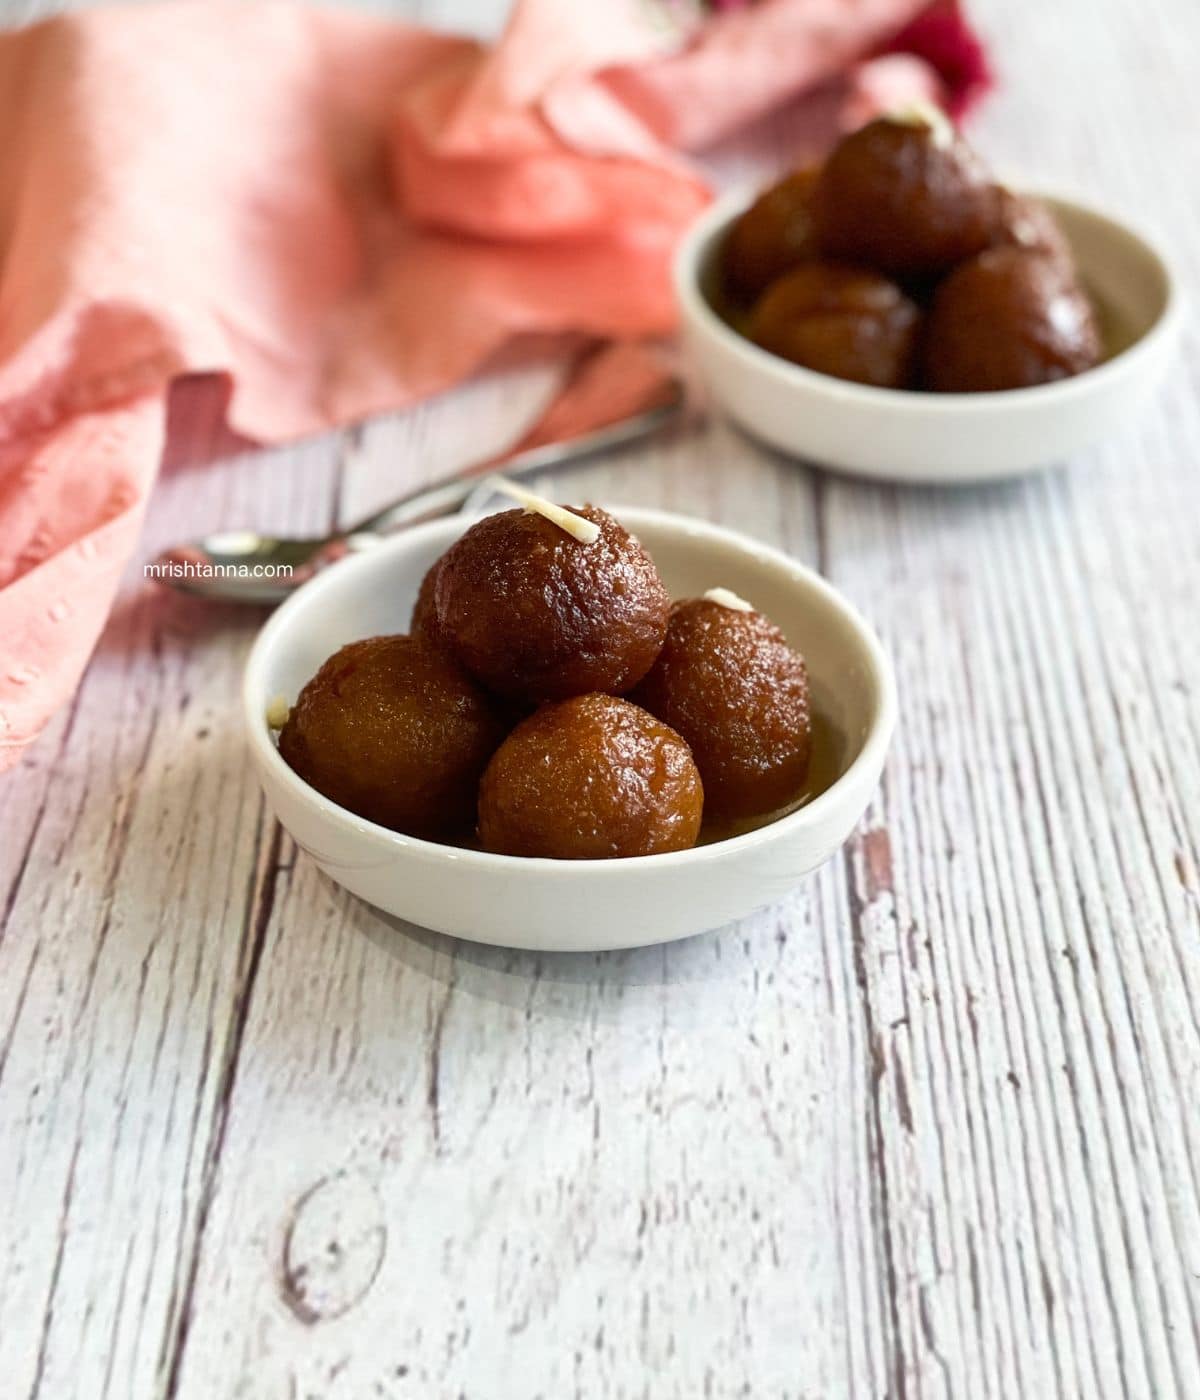 A bowl of vegan gulab jamun is on the table.